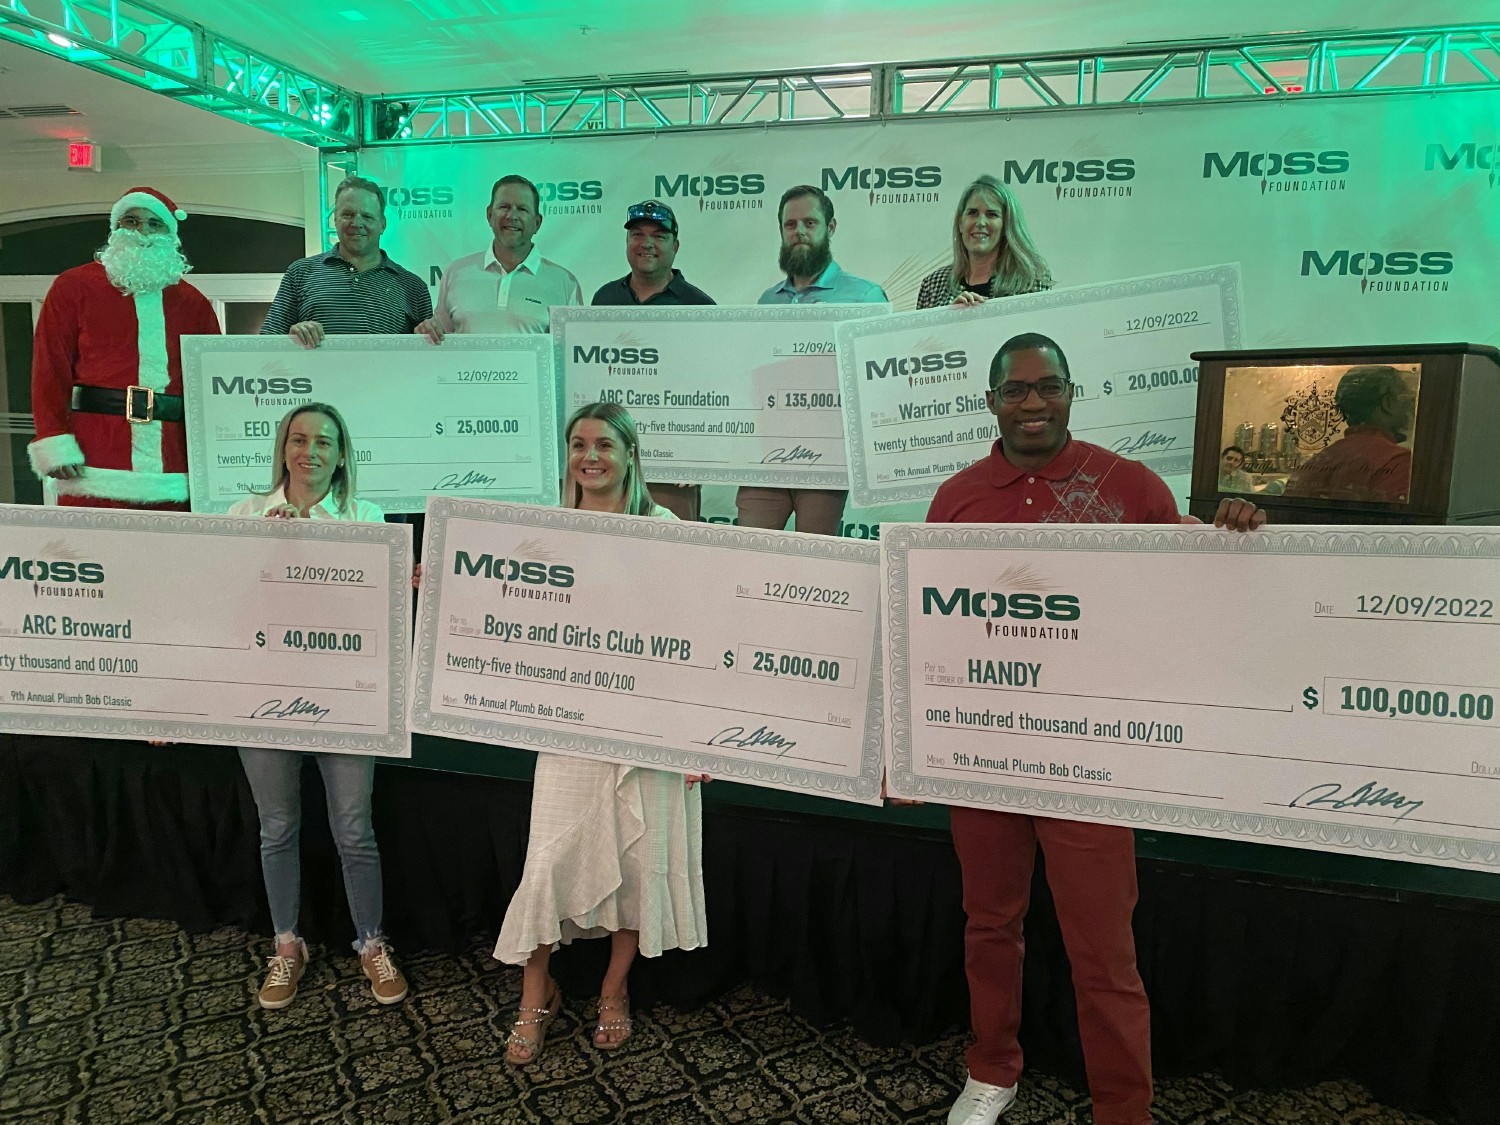 $345,000 was raised for six non-profit organizations at the 9th Annual Plumb Bob Classic golf tournament.